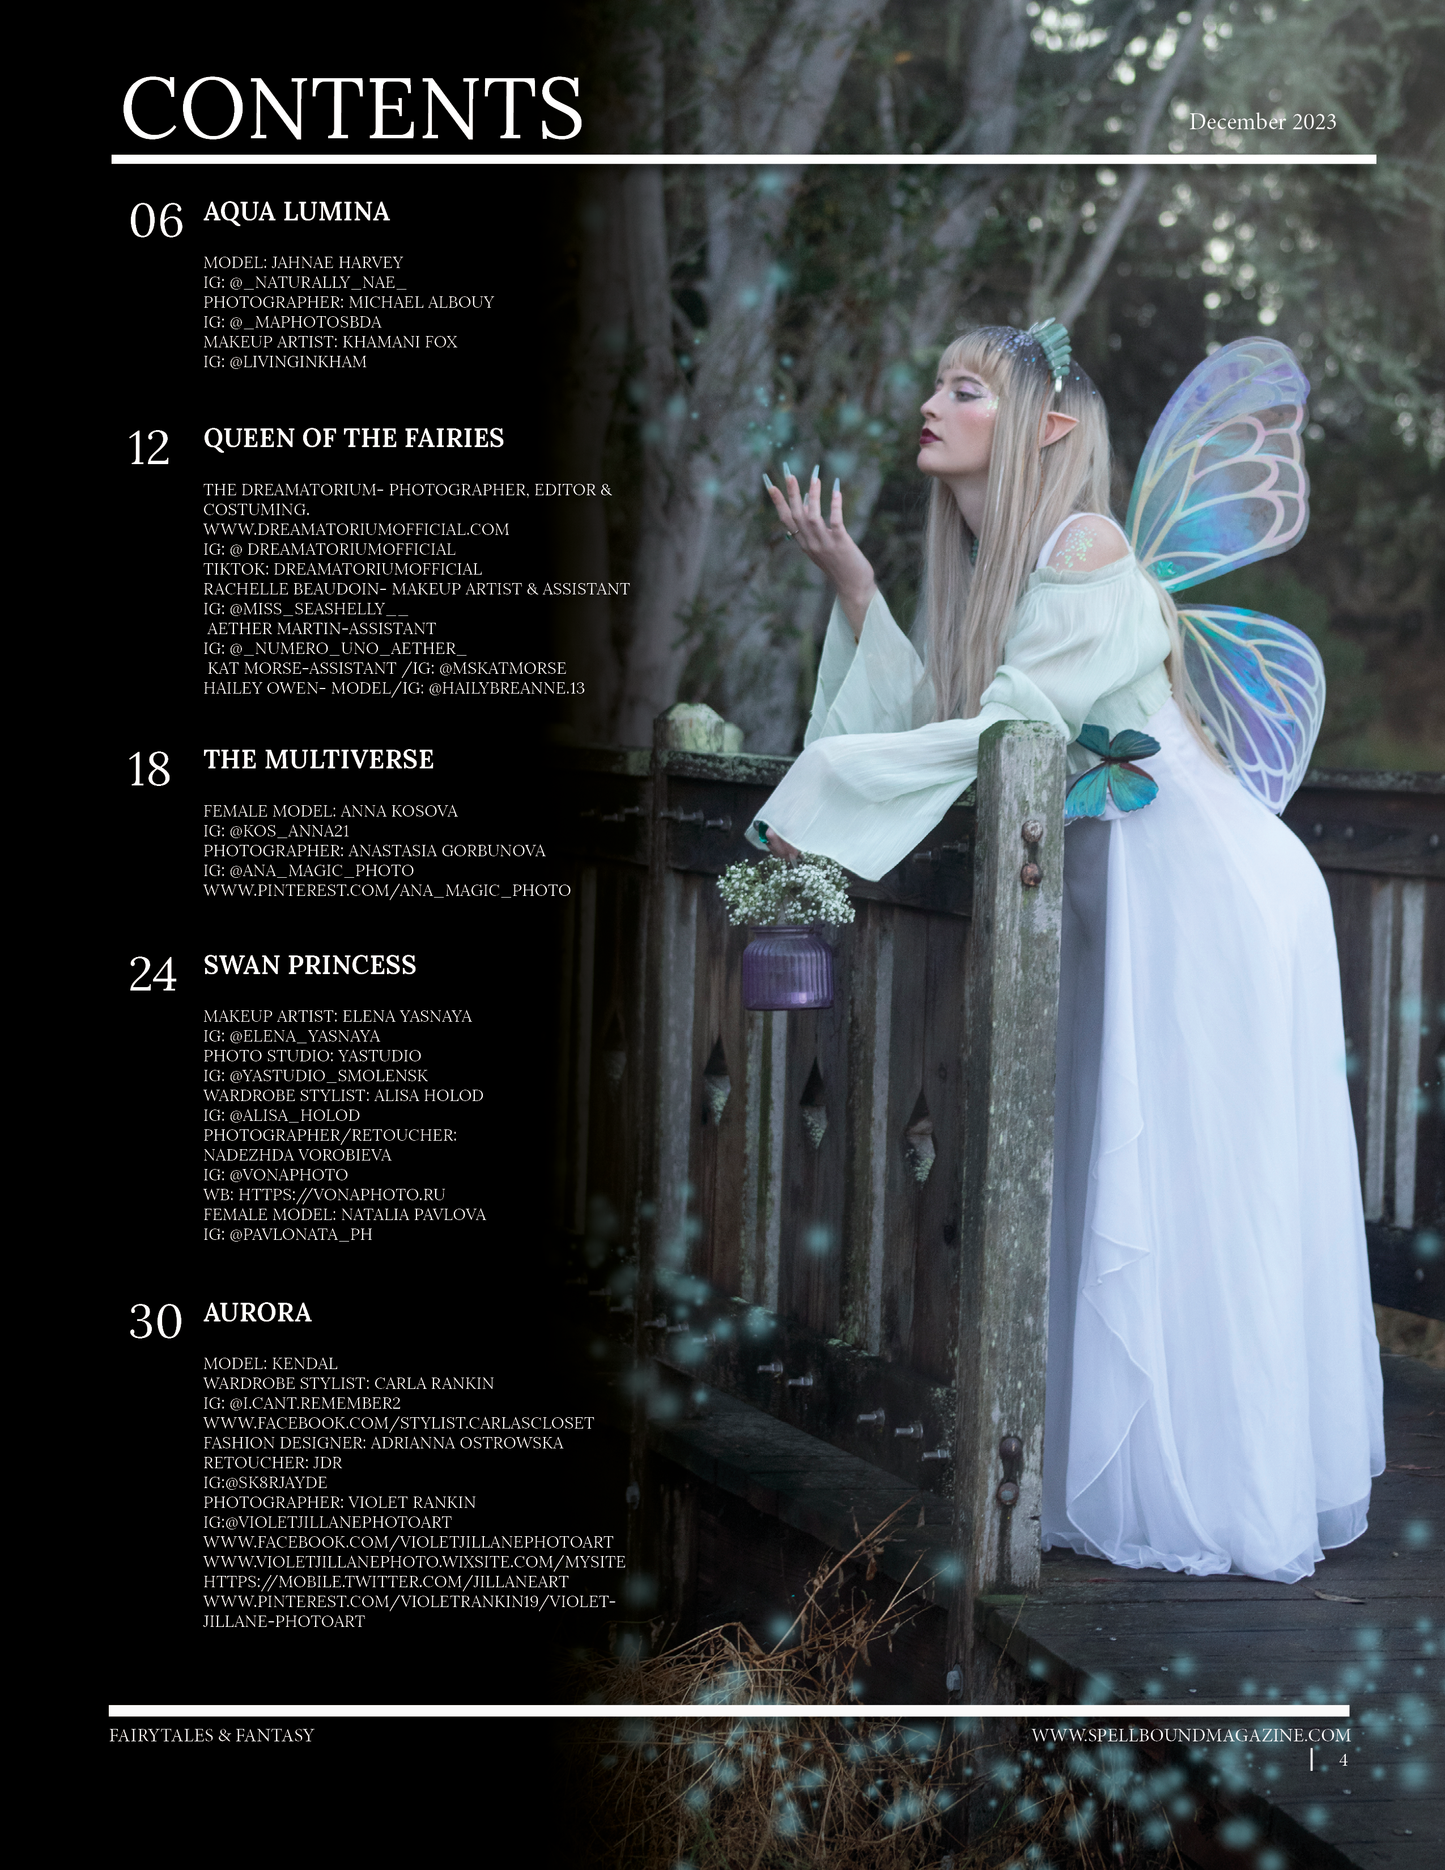 Spellbound Fairytales and Fantasy Magazine - December 2023: The Enchanted Realms Issue⁠ I